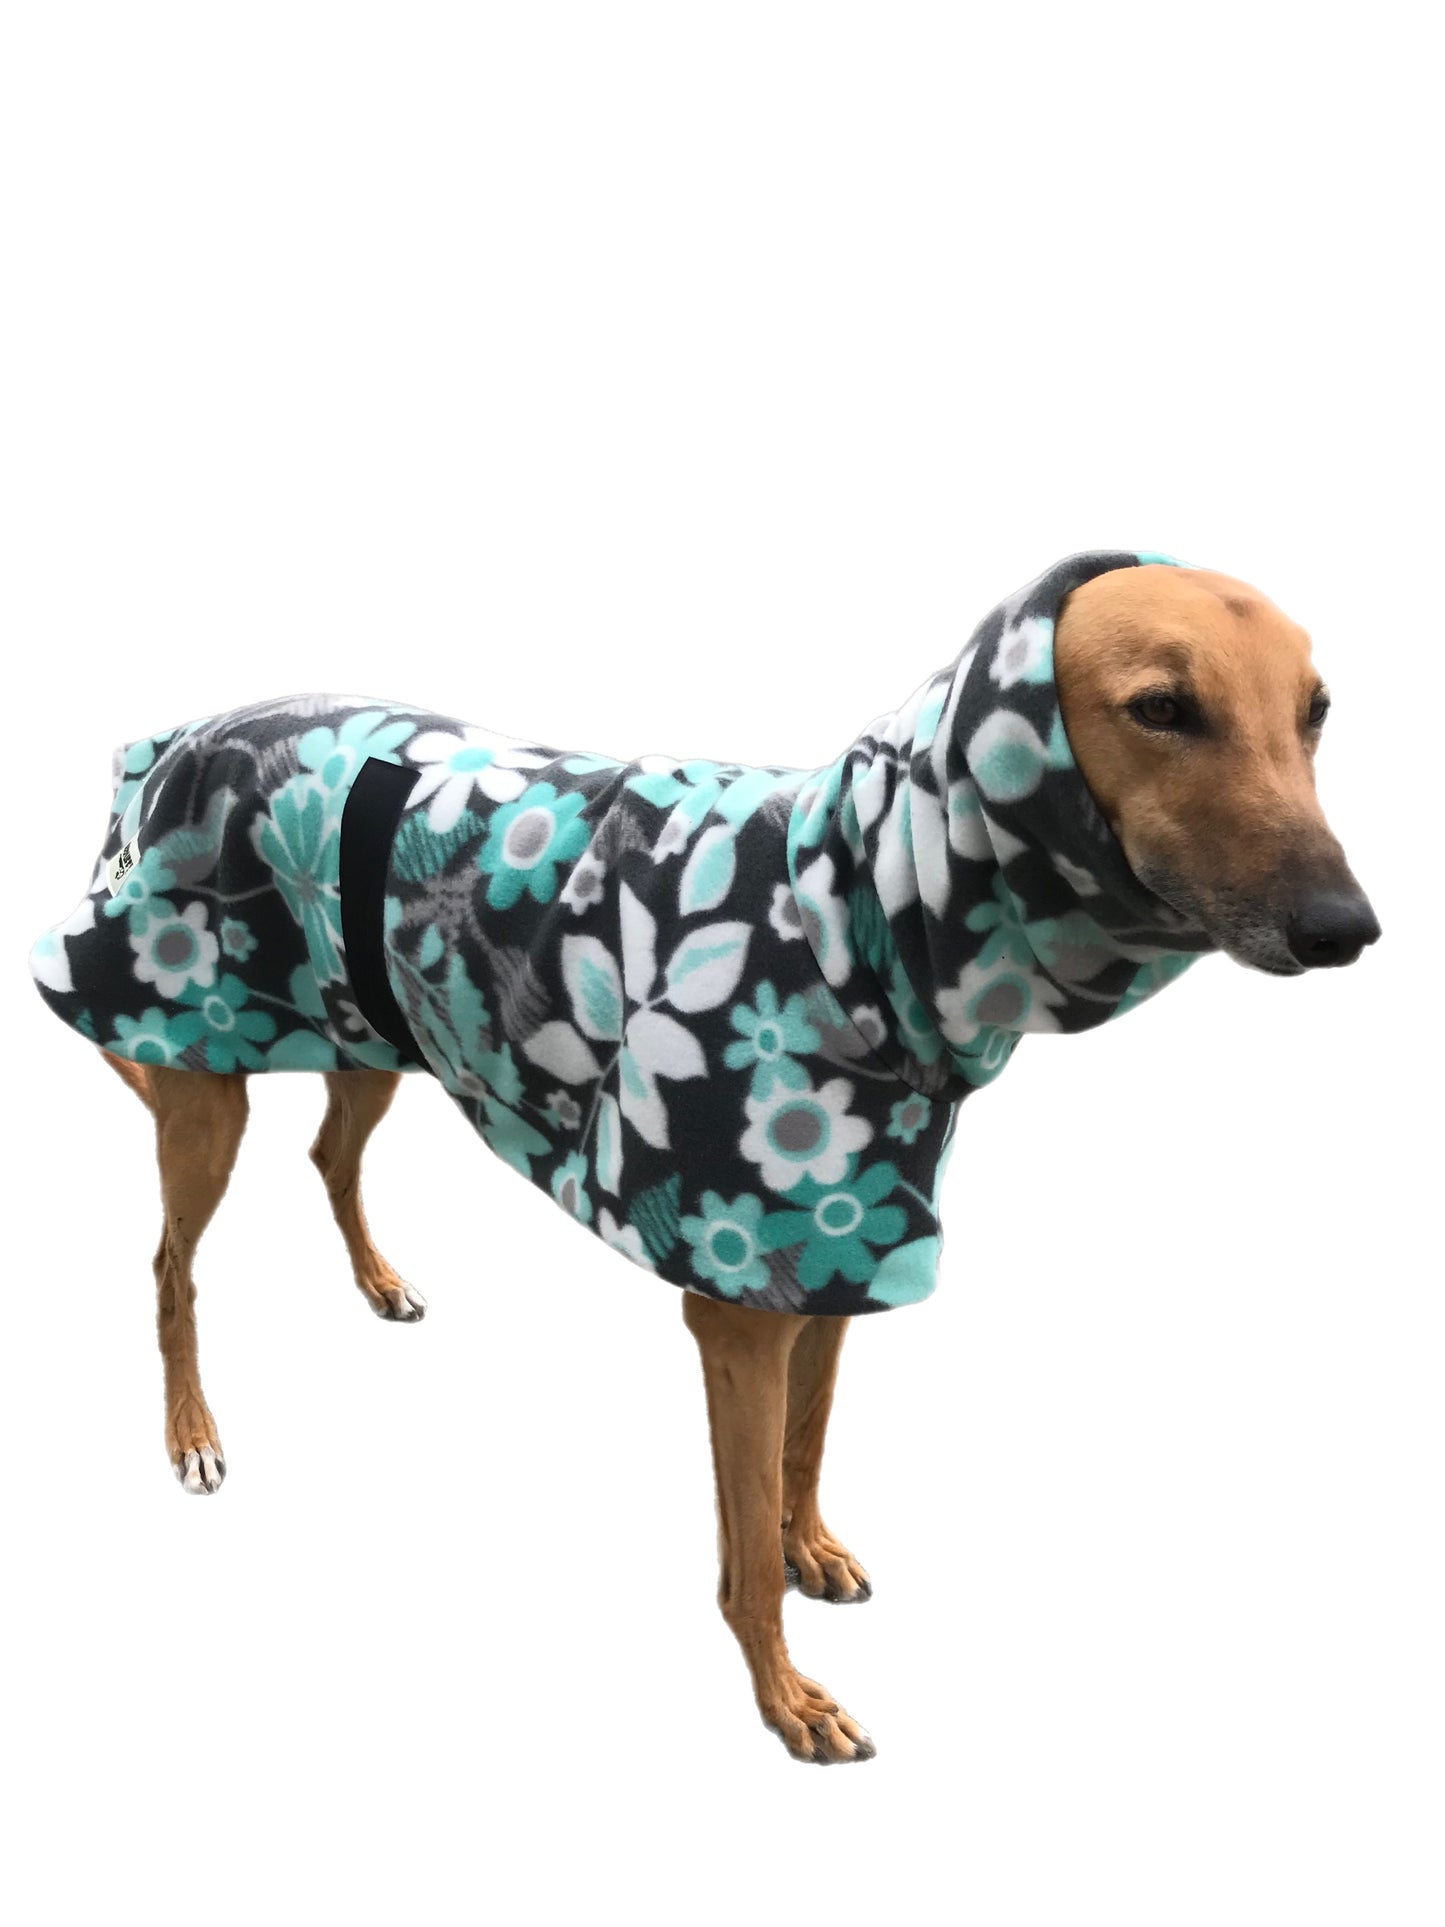 Mint & grey deluxe style greyhound coat with snuggly wide neck roll